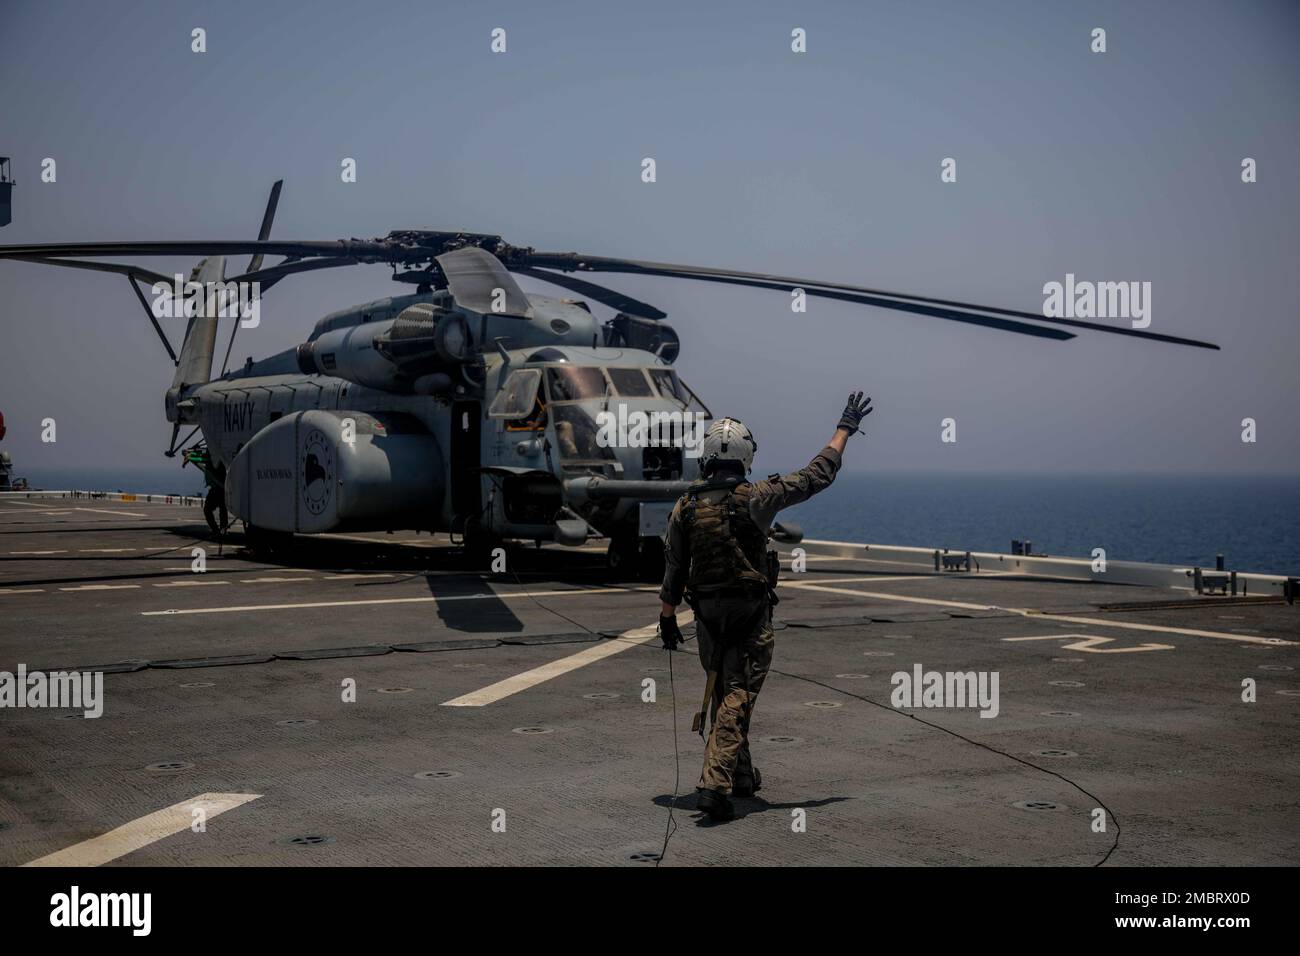 220621-A-EQ028-1055 ARABIAN GULF (June 21, 2022) Aviation Warfare Systems 3rd Class Kyle Gumz directs an MH-53 Sea Dragon helicopter, attached to Helicopter Mine Countermeasures (HM) Squadron 15, during flight operations aboard the expeditionary sea base USS Lewis B. Puller (ESB 3), during exercise Iron Defender in the Arabian Gulf, June 21. Iron Defender is an annual bilateral training event between U.S. Naval Forces Central Command and forces from the United Arab Emirates. The exercise focuses on maritime security operations, mine countermeasures, and harbor defense. Stock Photo